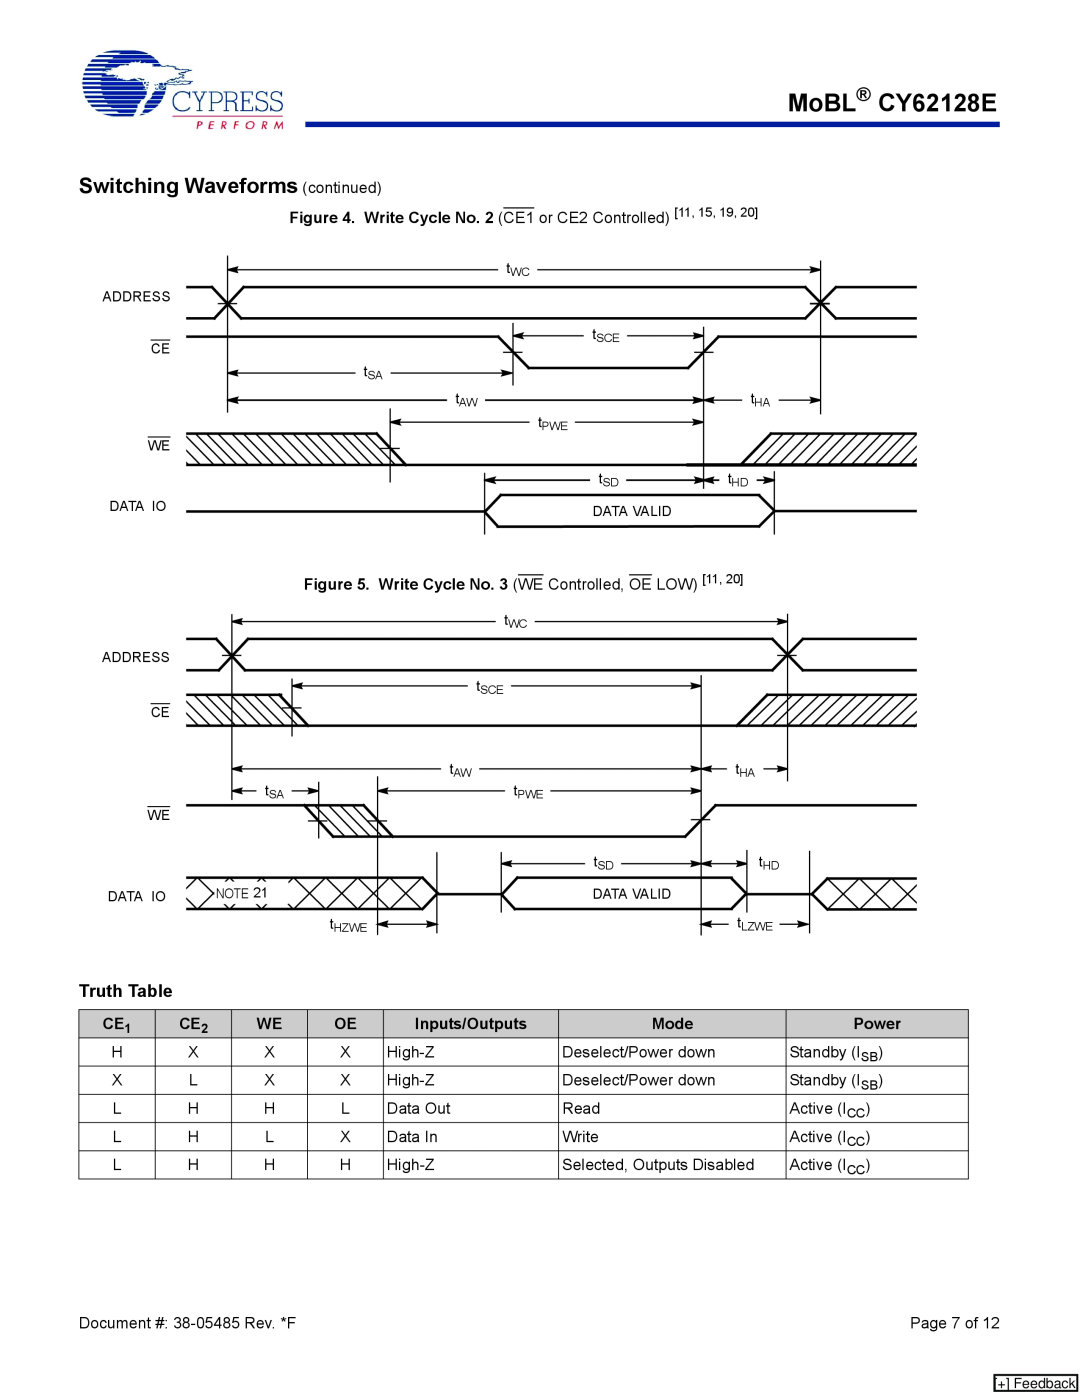 Cypress manual Switching Waveforms continued, Truth Table, MoBL CY62128E 